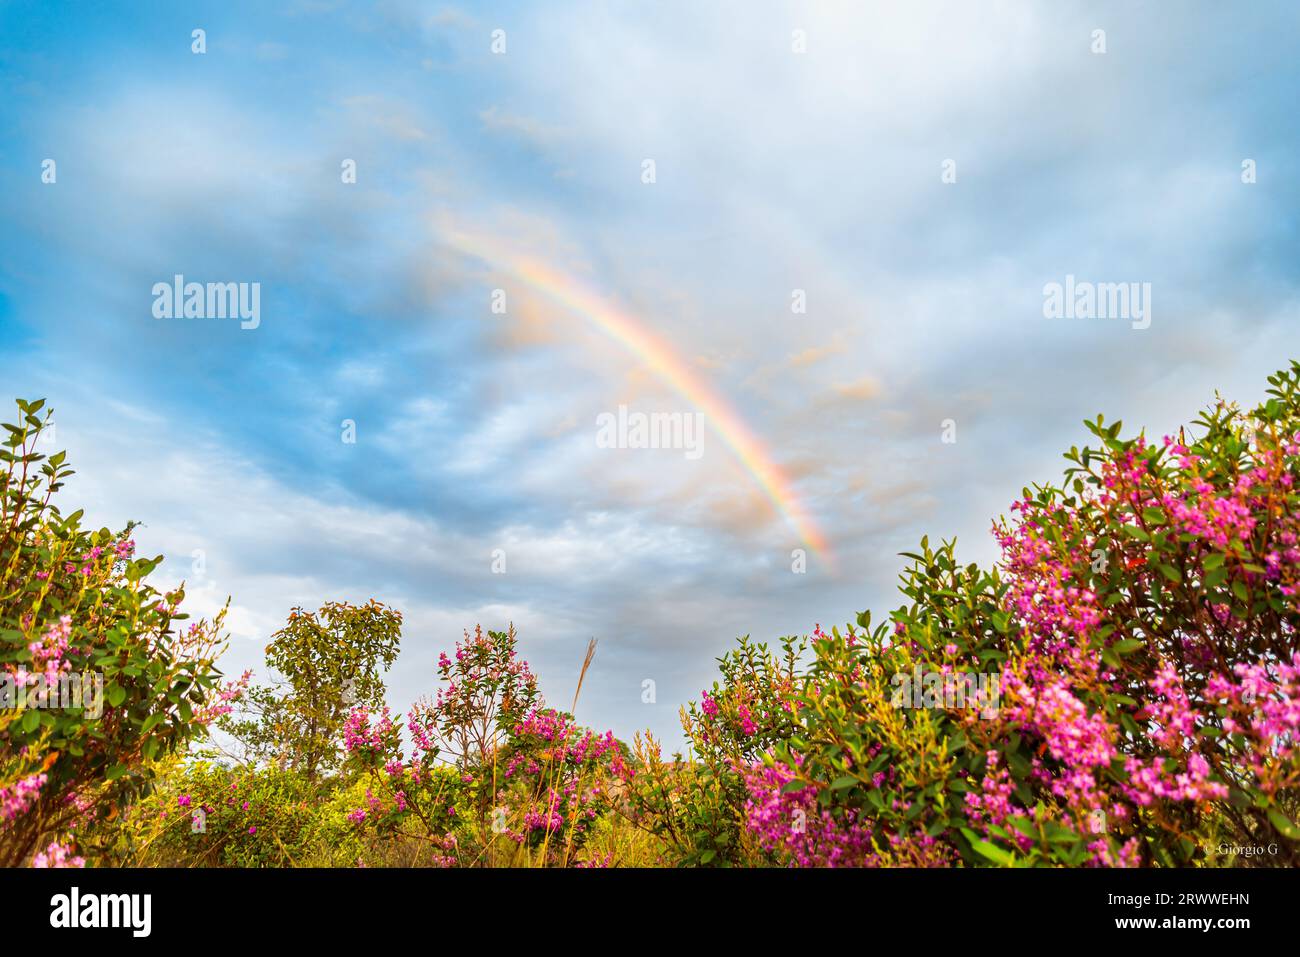 Rainbow crossing the sky over trees with pink flowers Stock Photo